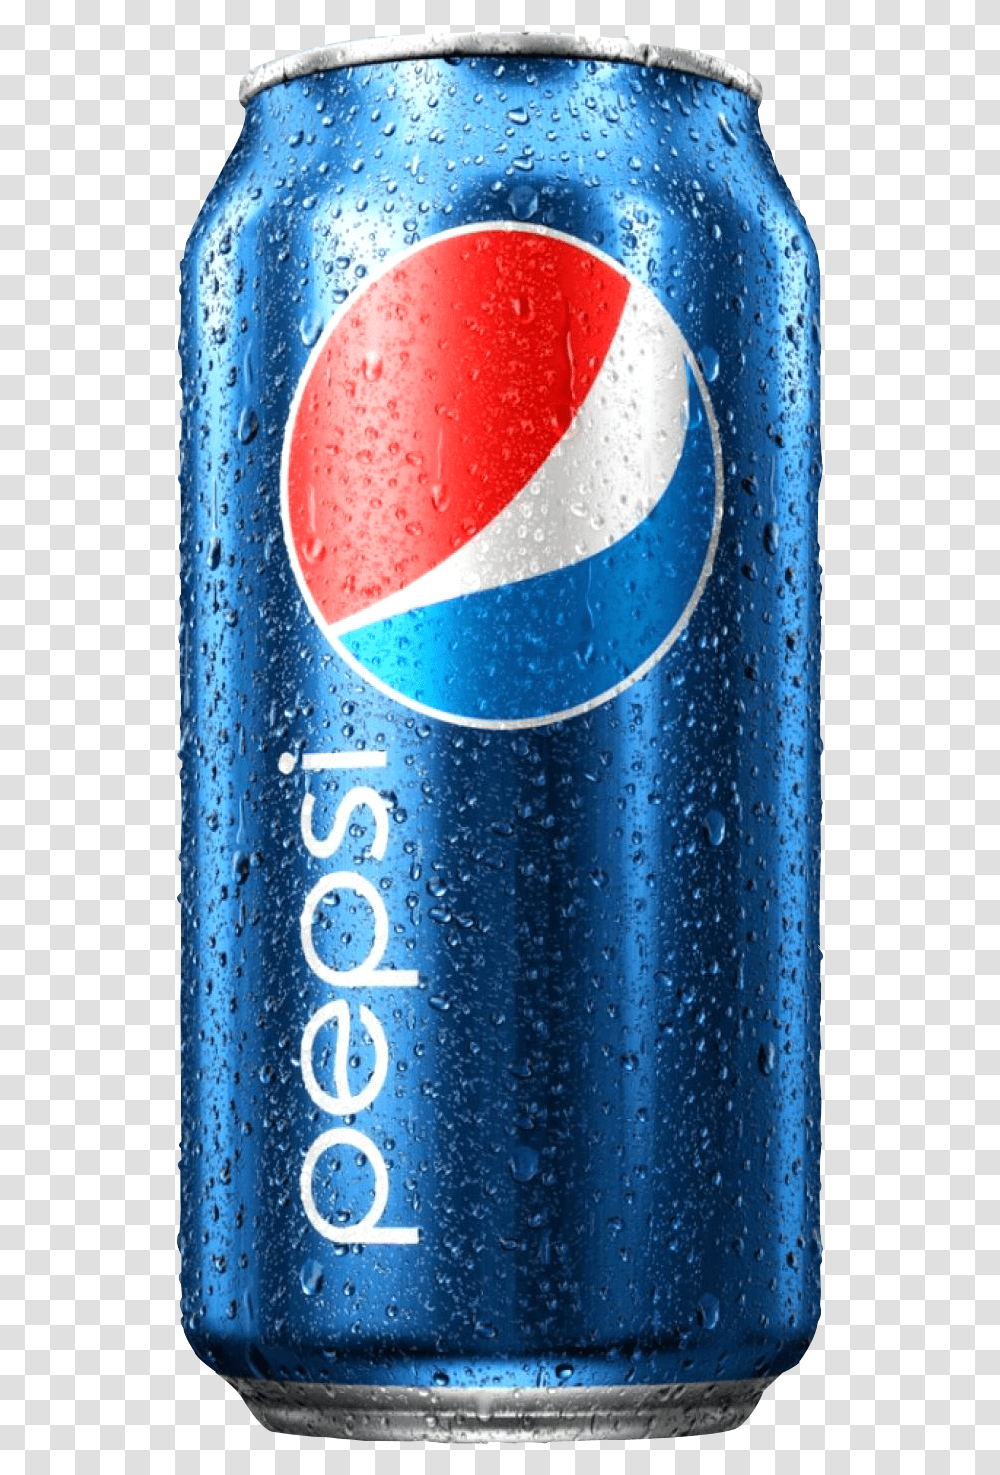 Beverage Canaluminum Cansoft Drinkcarbonated Soft Background Pepsi Can, Soda, Milk, Tin, Coke Transparent Png